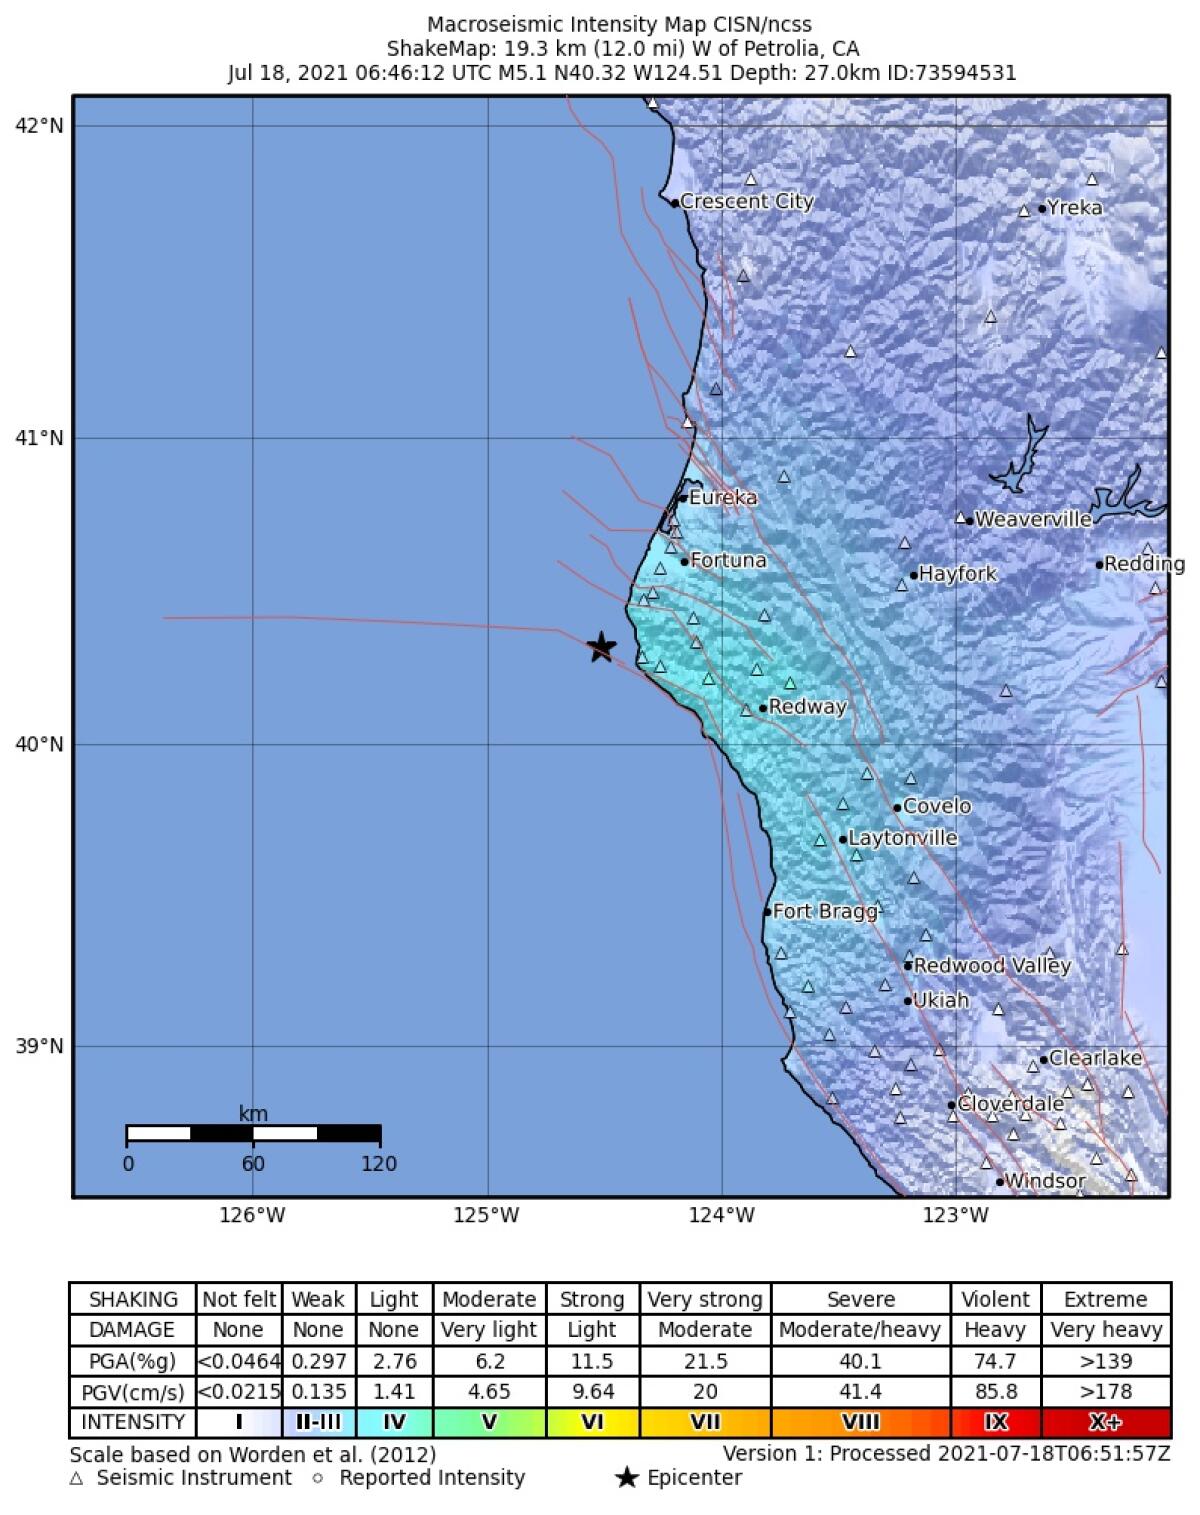 A map showing the epicenter and shake intensity of a magnitude 5.0 earthquake offshore from Fortuna, Calif.